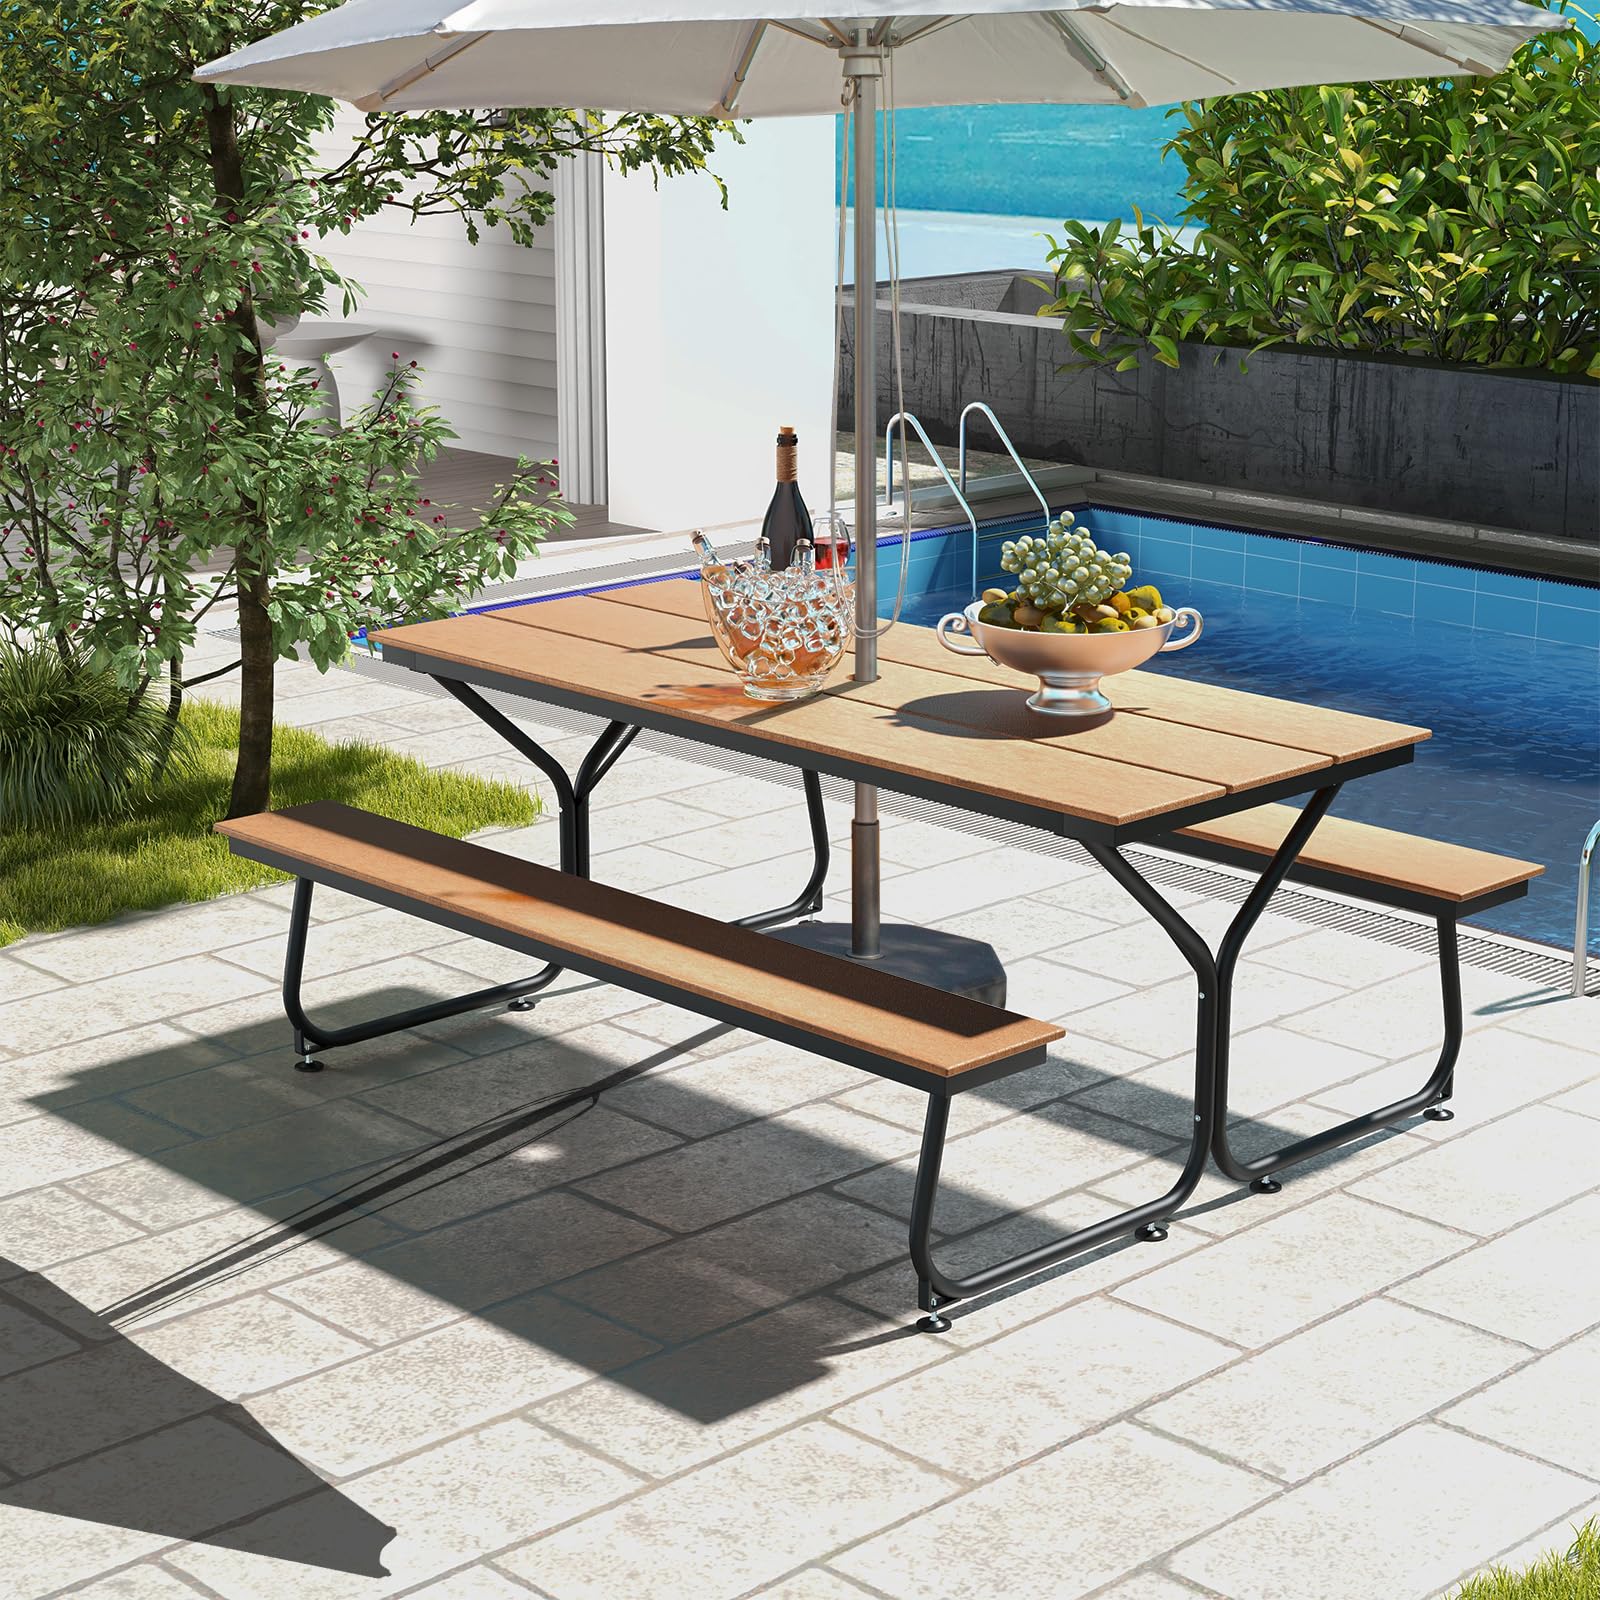 Giantex 6 FT Outdoor Picnic Table Bench Set for 6-8 People